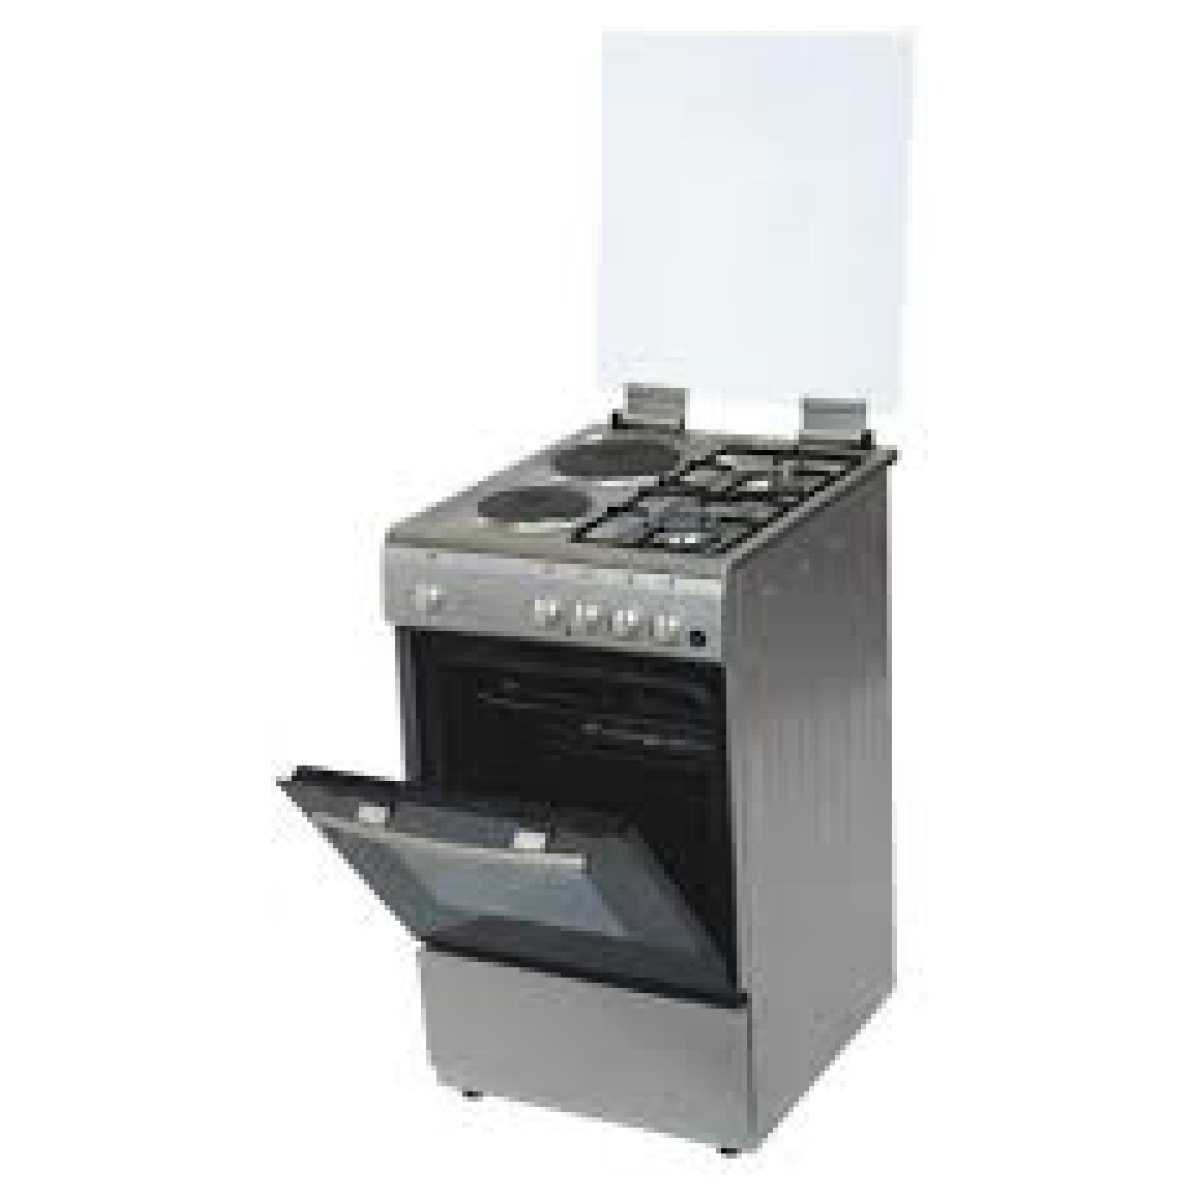 SCANFROST GAS COOKER FST 562 GXIG IGNIS COOKER 4+2